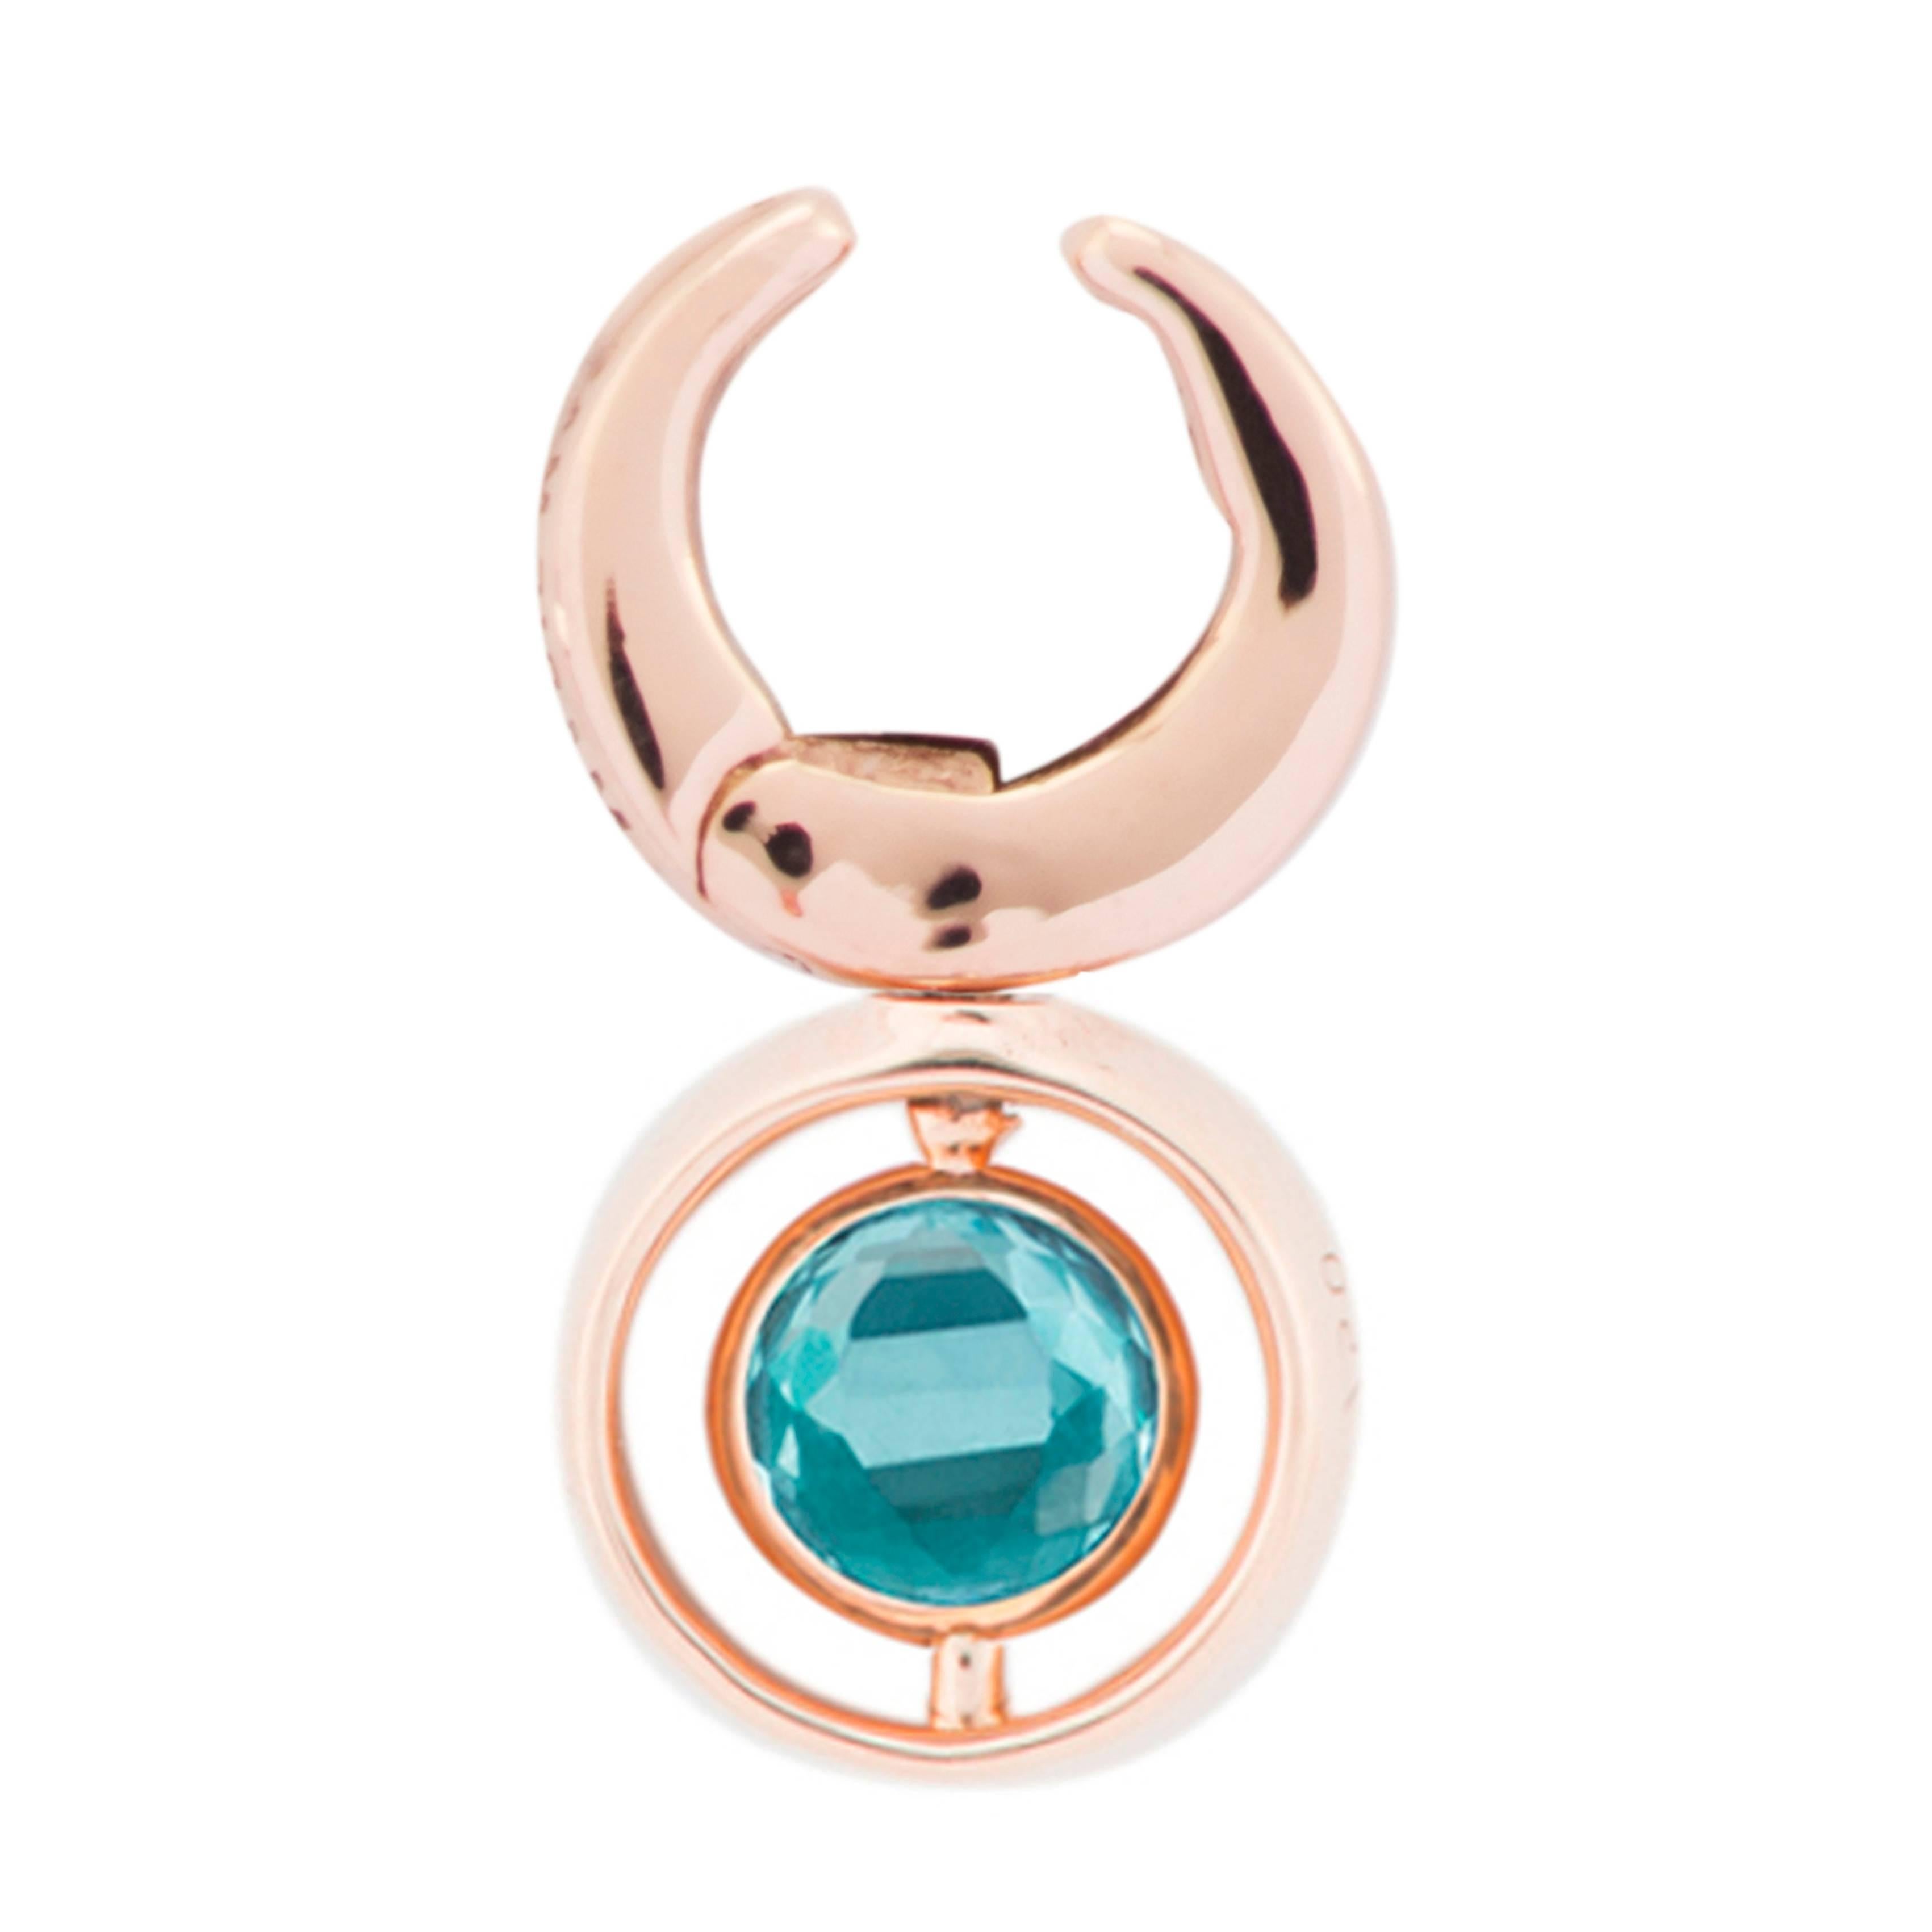 This Single Clip Earring is designed by the French Jewelry brand Marie Mas, it is in 18 Karat Rose Gold, with Diamonds, Pink Amethyst and London Blue Topaz. The center stone is reversible : there is a Pink Amethyst and a London Blue Topaz back to